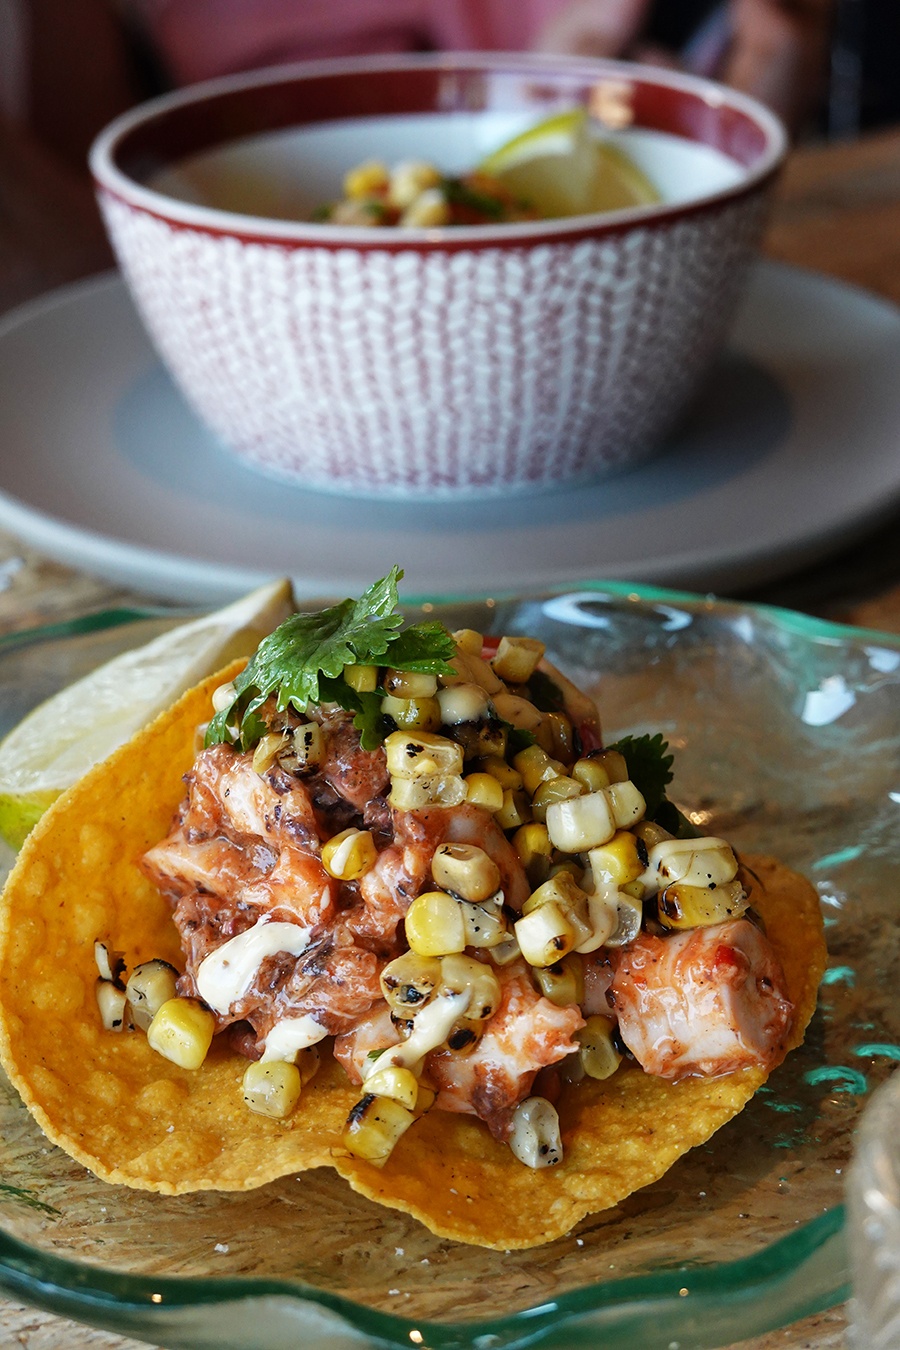 Chunks of octopus in a spicy red sauce are mixed with charred corn kernels, served on a crispy tortilla.